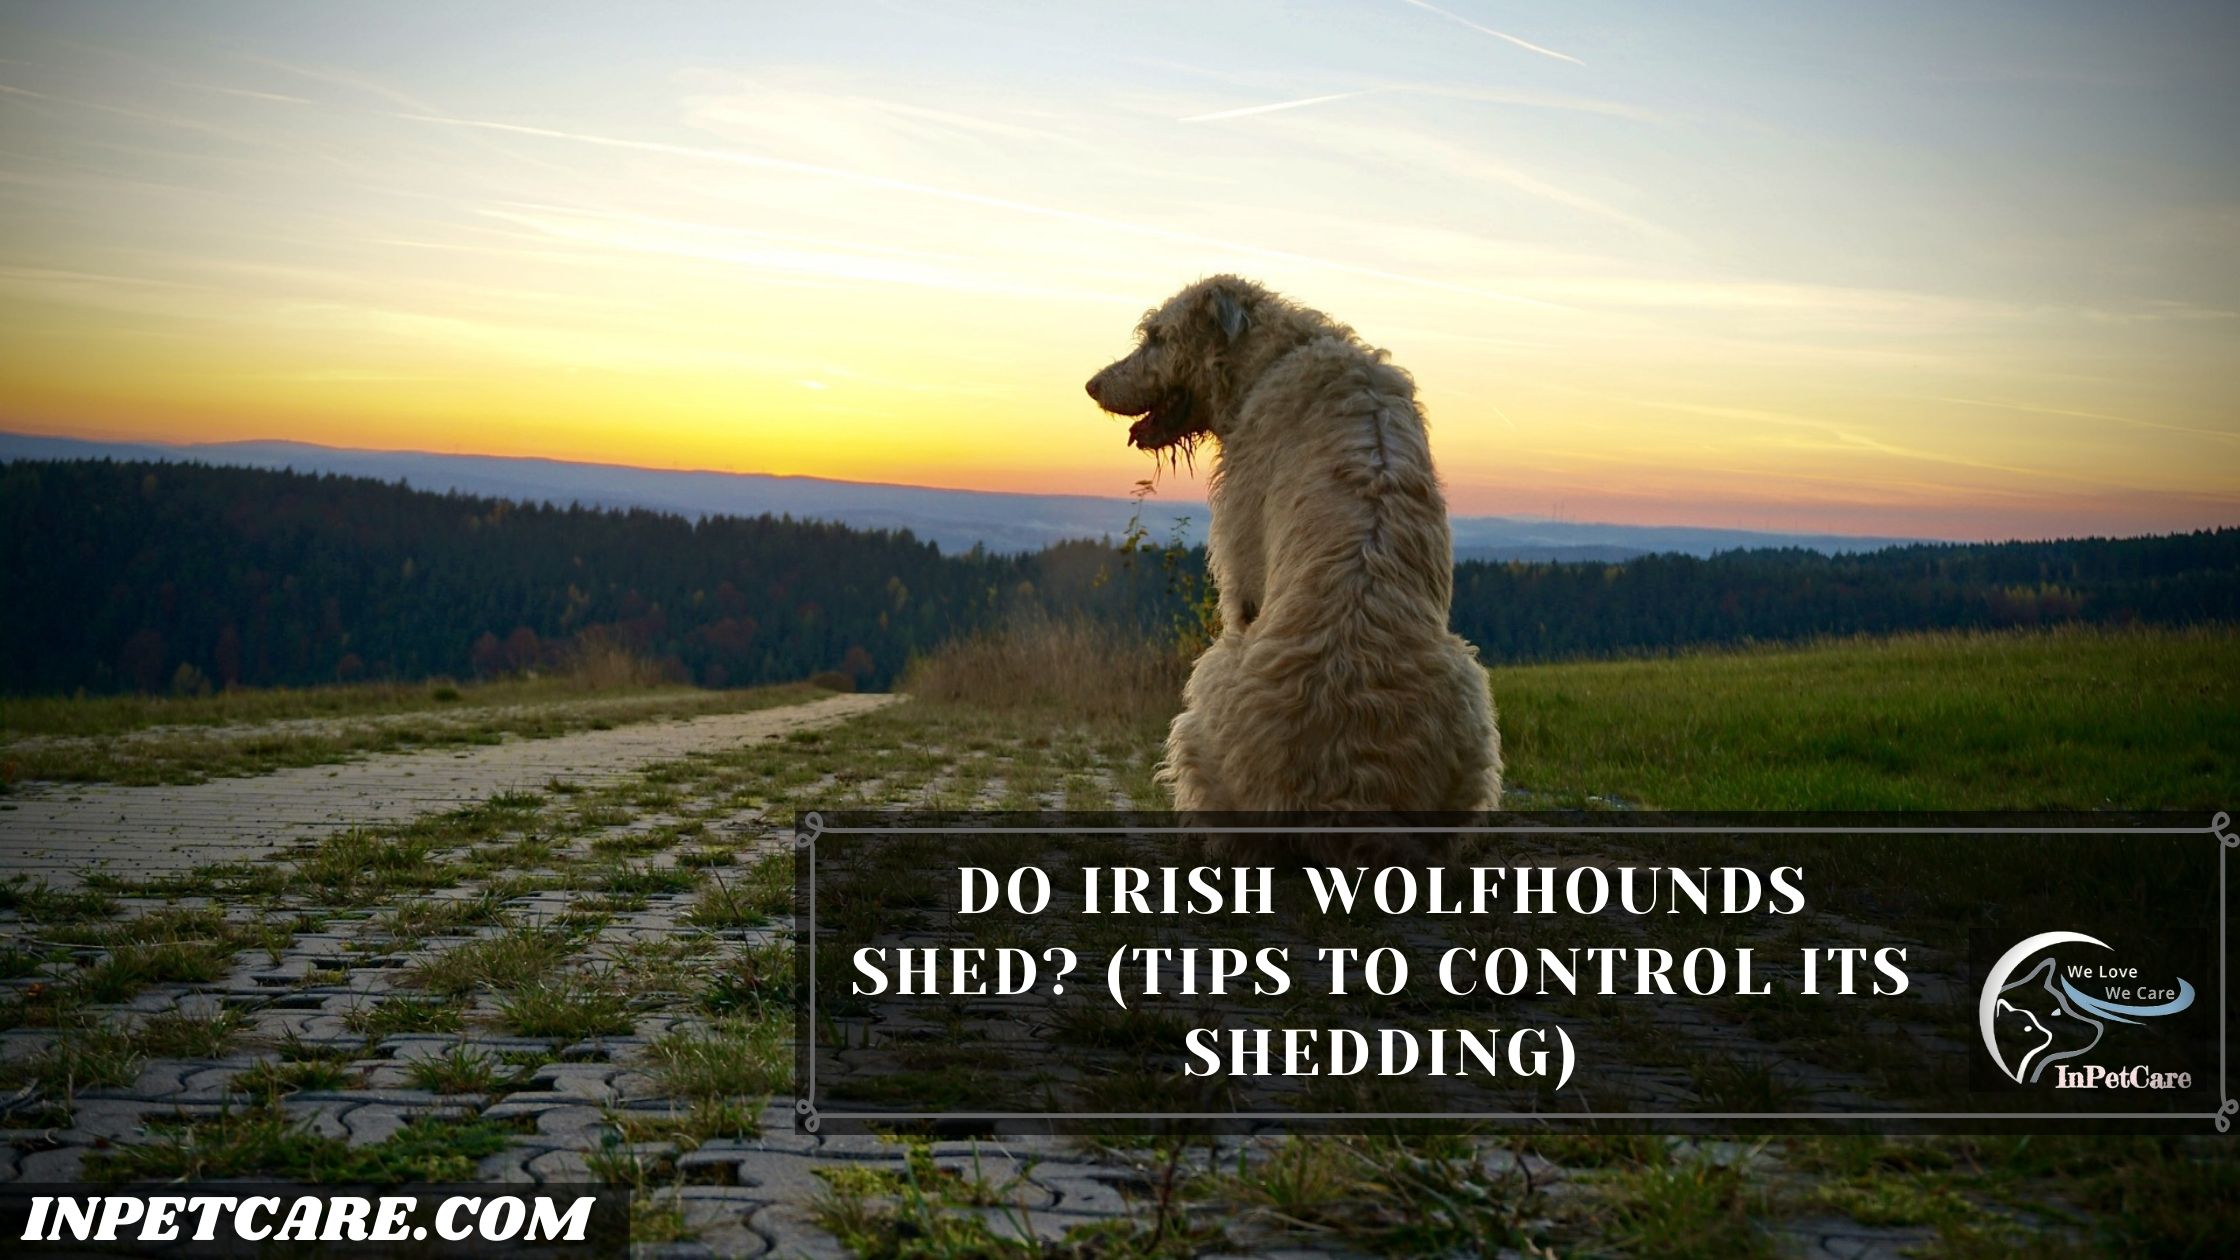 Do Irish Wolfhounds Shed? (Tips To Control Its Shedding)